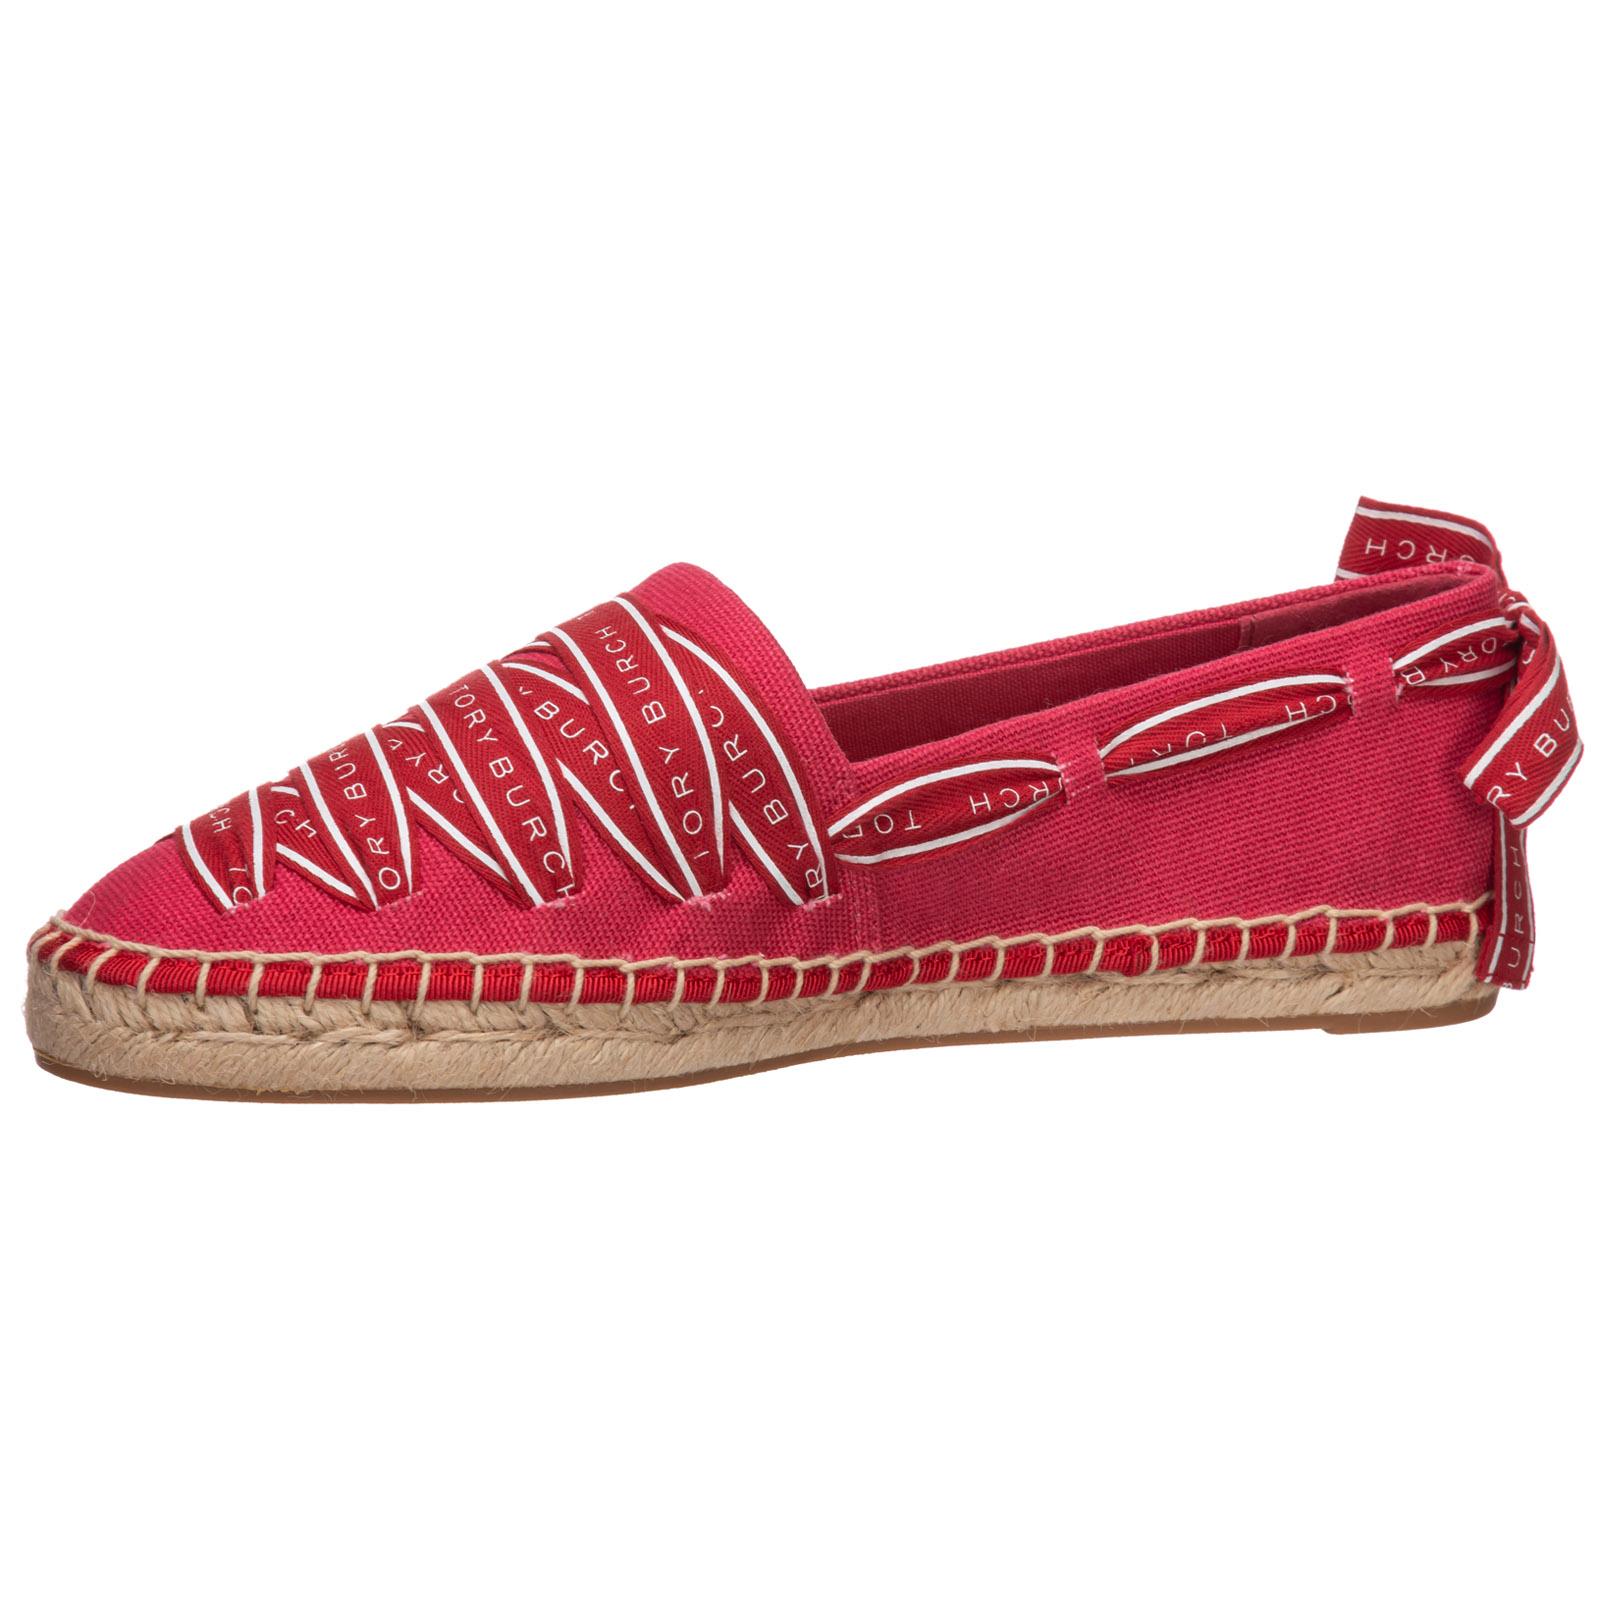 Tory Burch Cotton Logo Ribbon Espadrilles in Red - Save 51% - Lyst